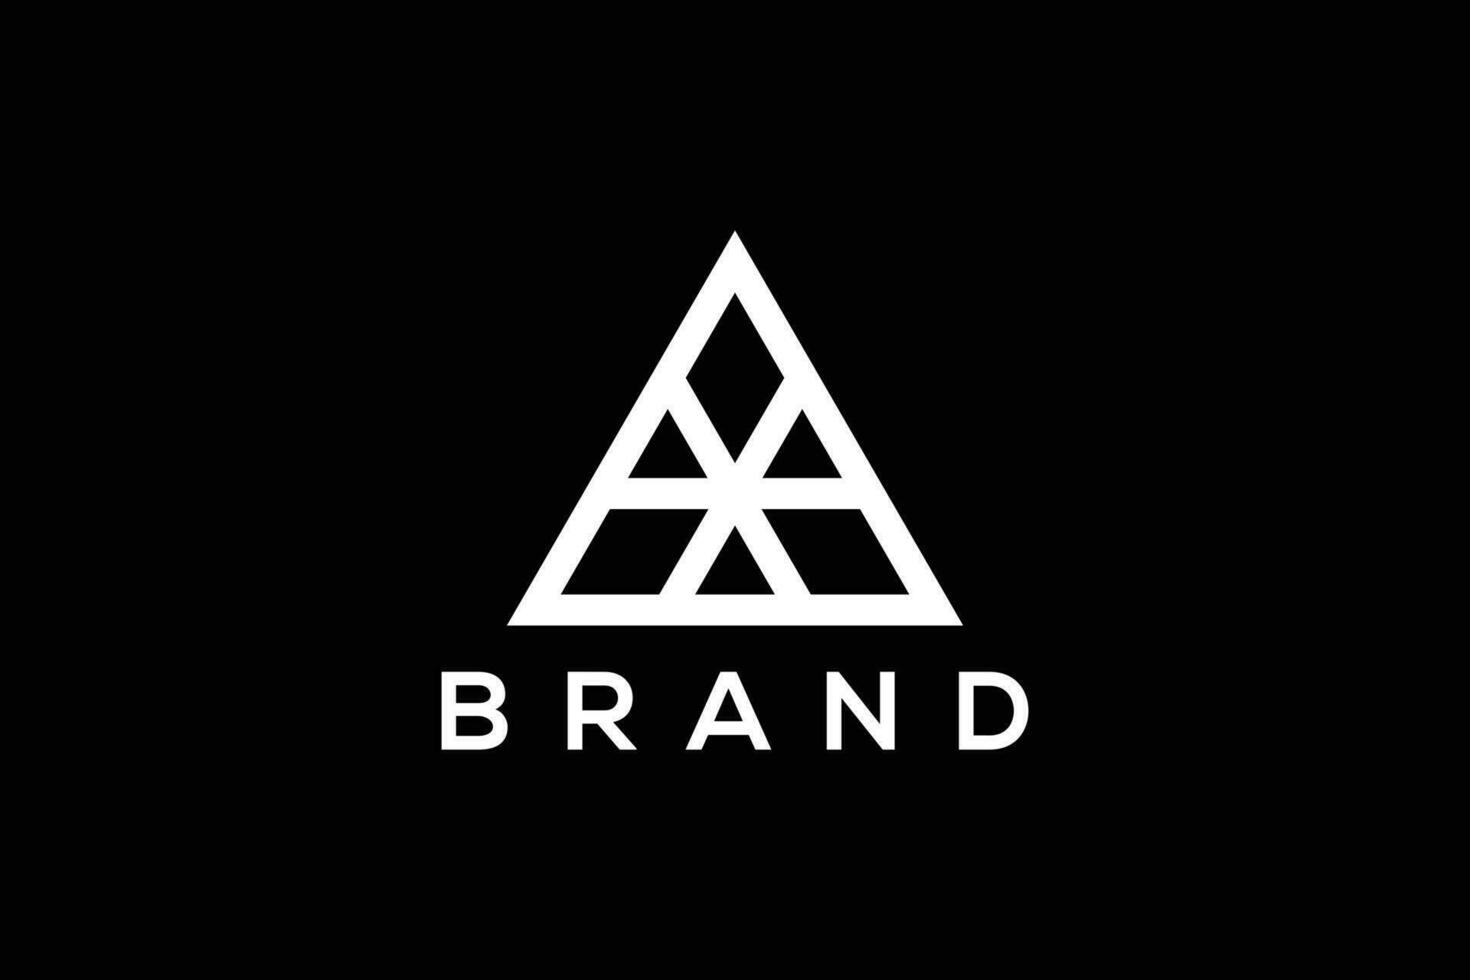 Minimal and abstract triangle vector logo design